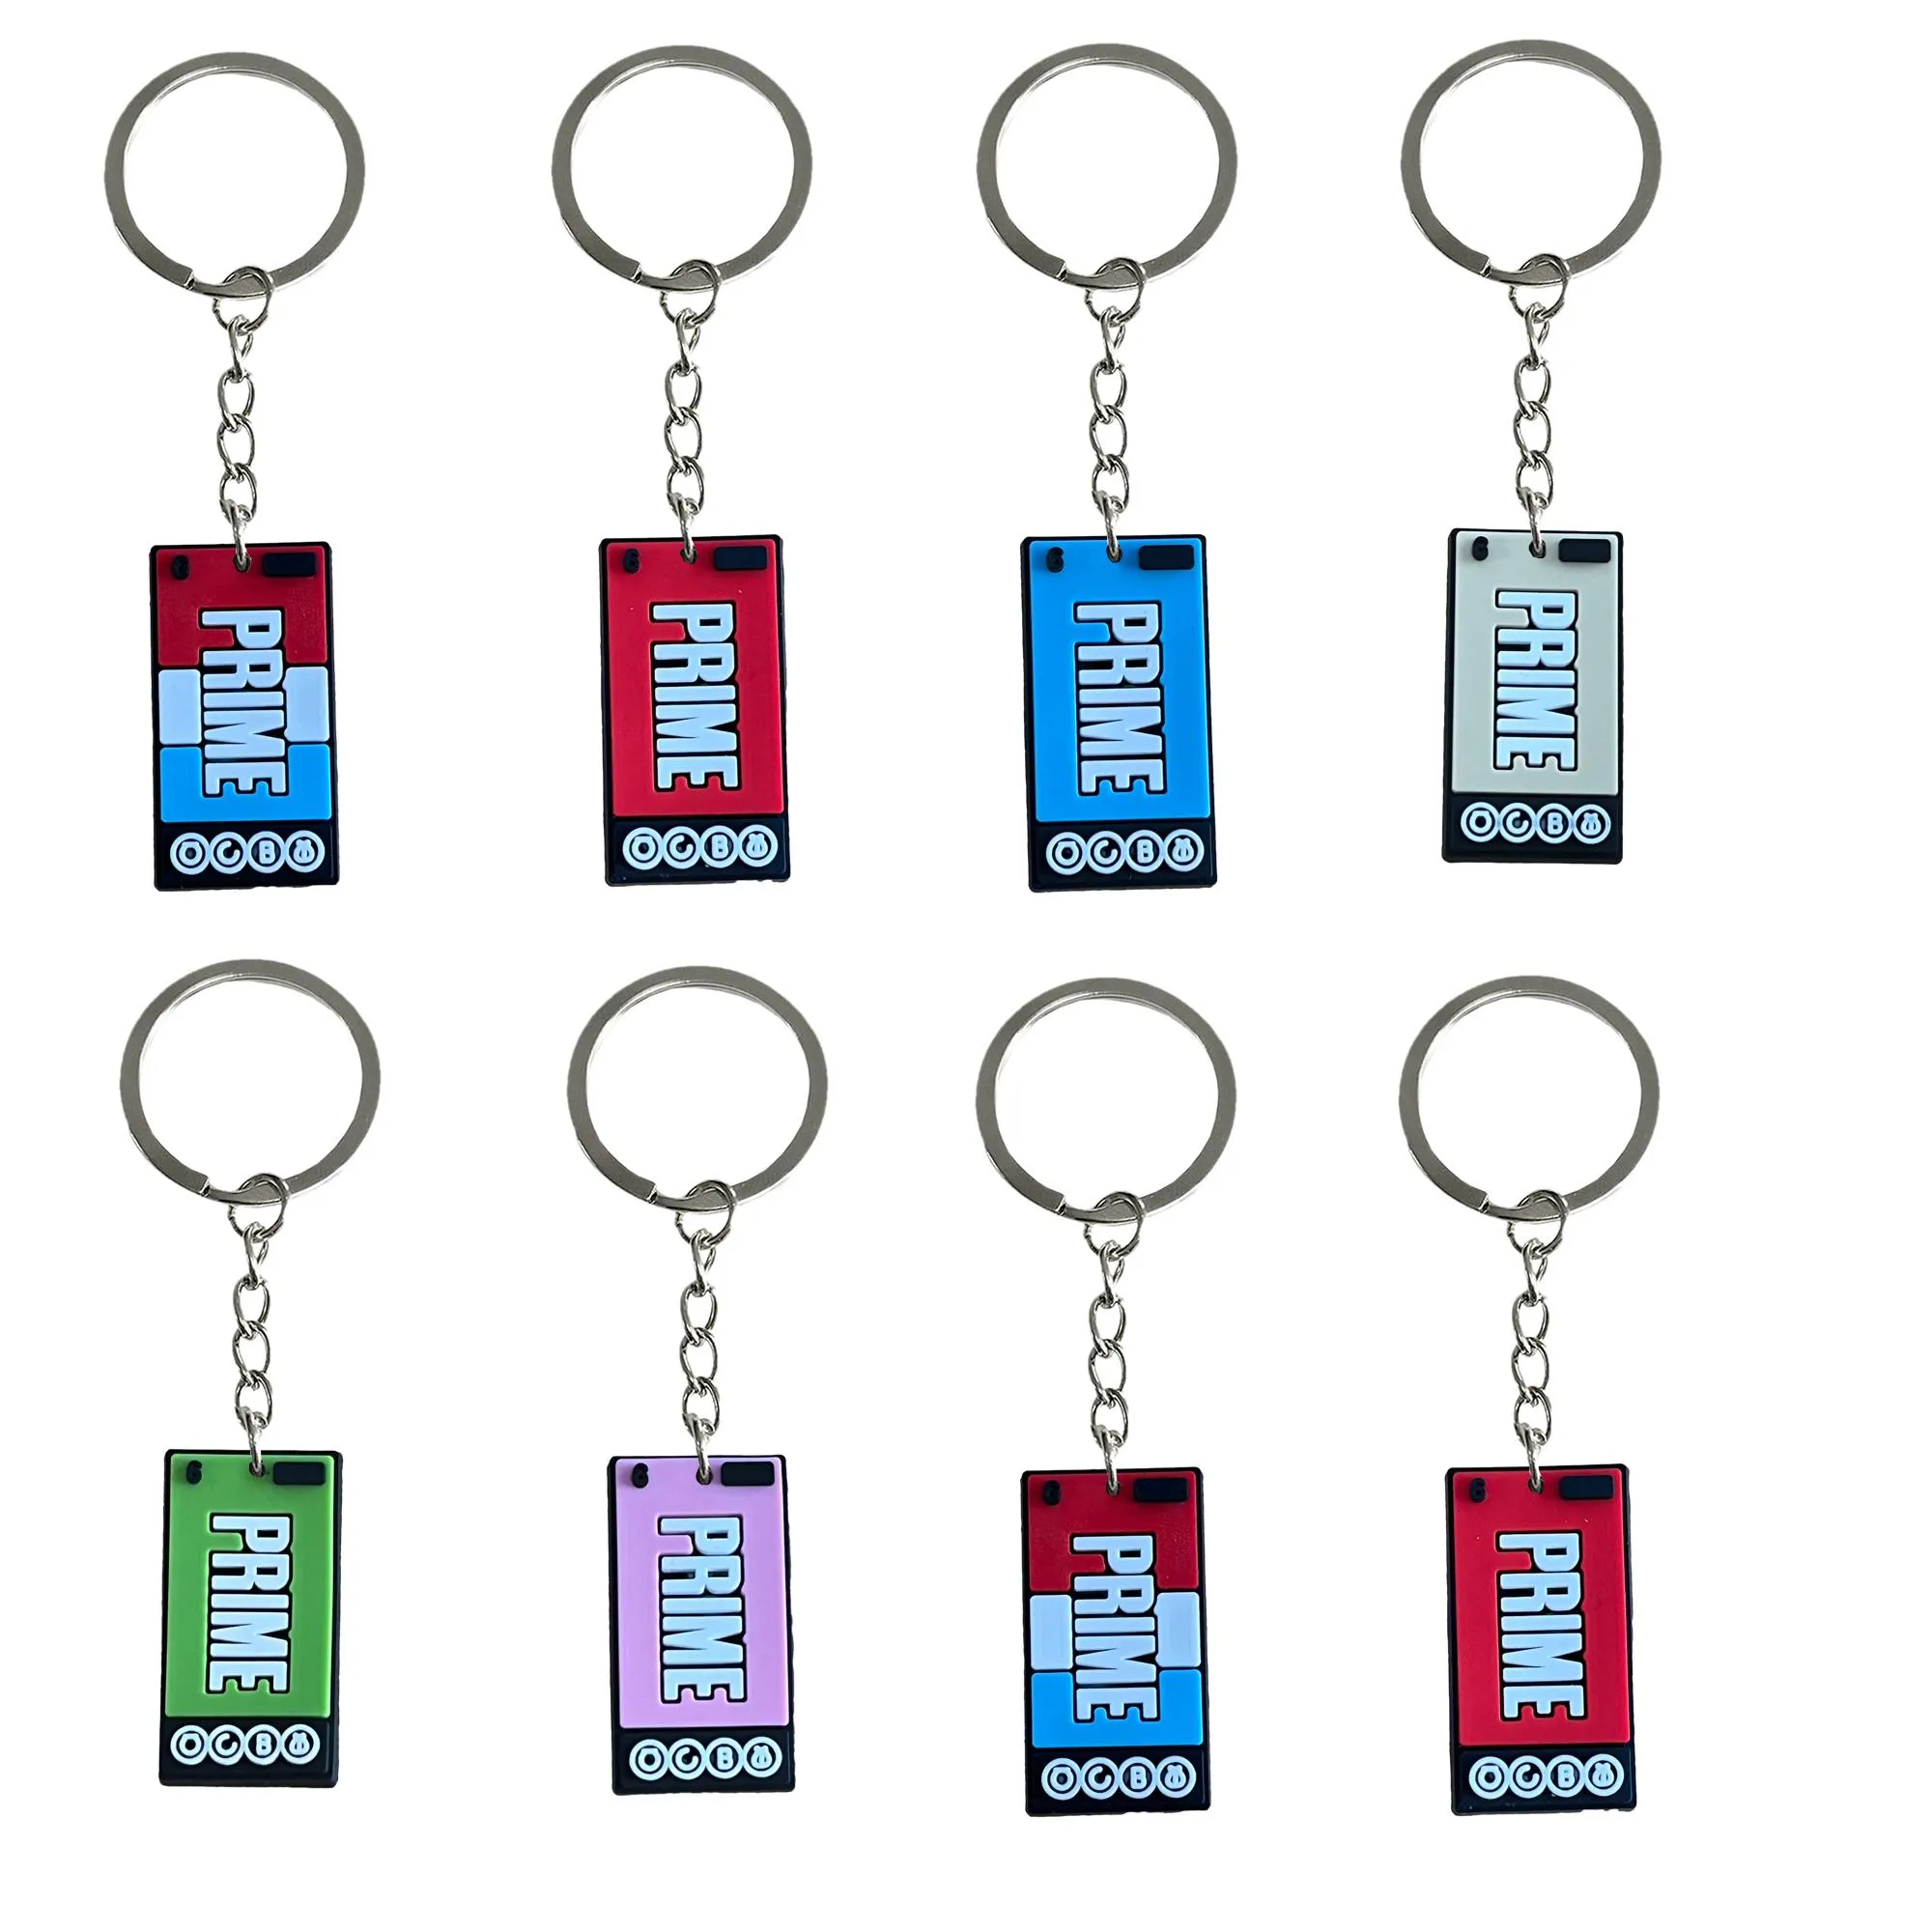 Thanksgiving Toys Supplies Square Prime Keychain Key Chain Ring Gift Christmas For Fans Boys Keychains Pendants Accessoires Kids Naissance Ote85